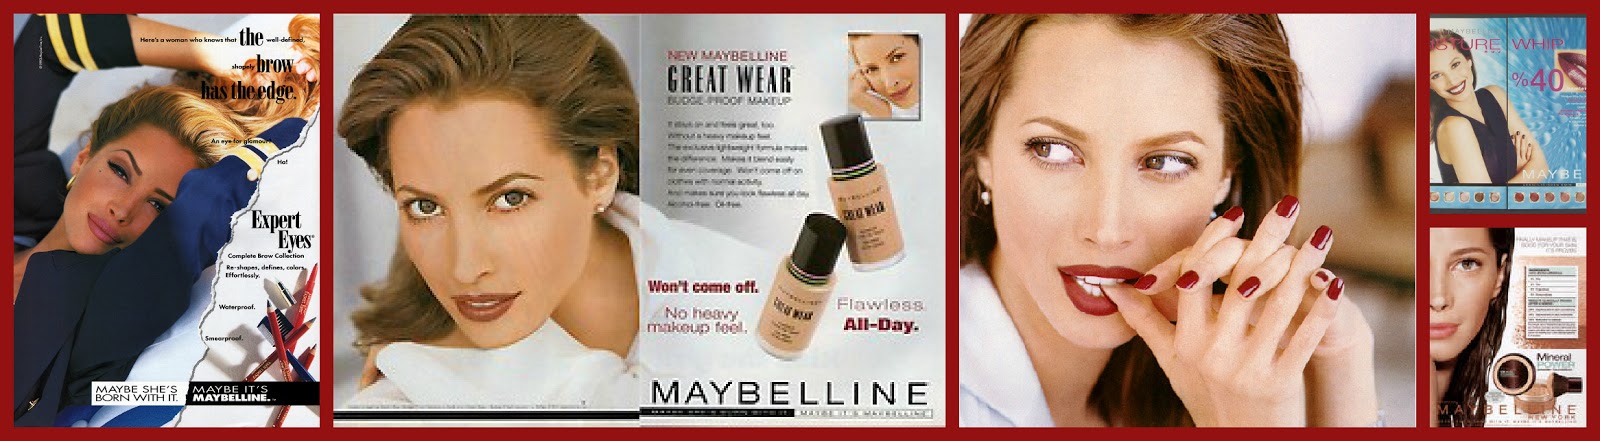 THE MAYBELLINE STORY : Wasserstein Perella paid $300 Million for